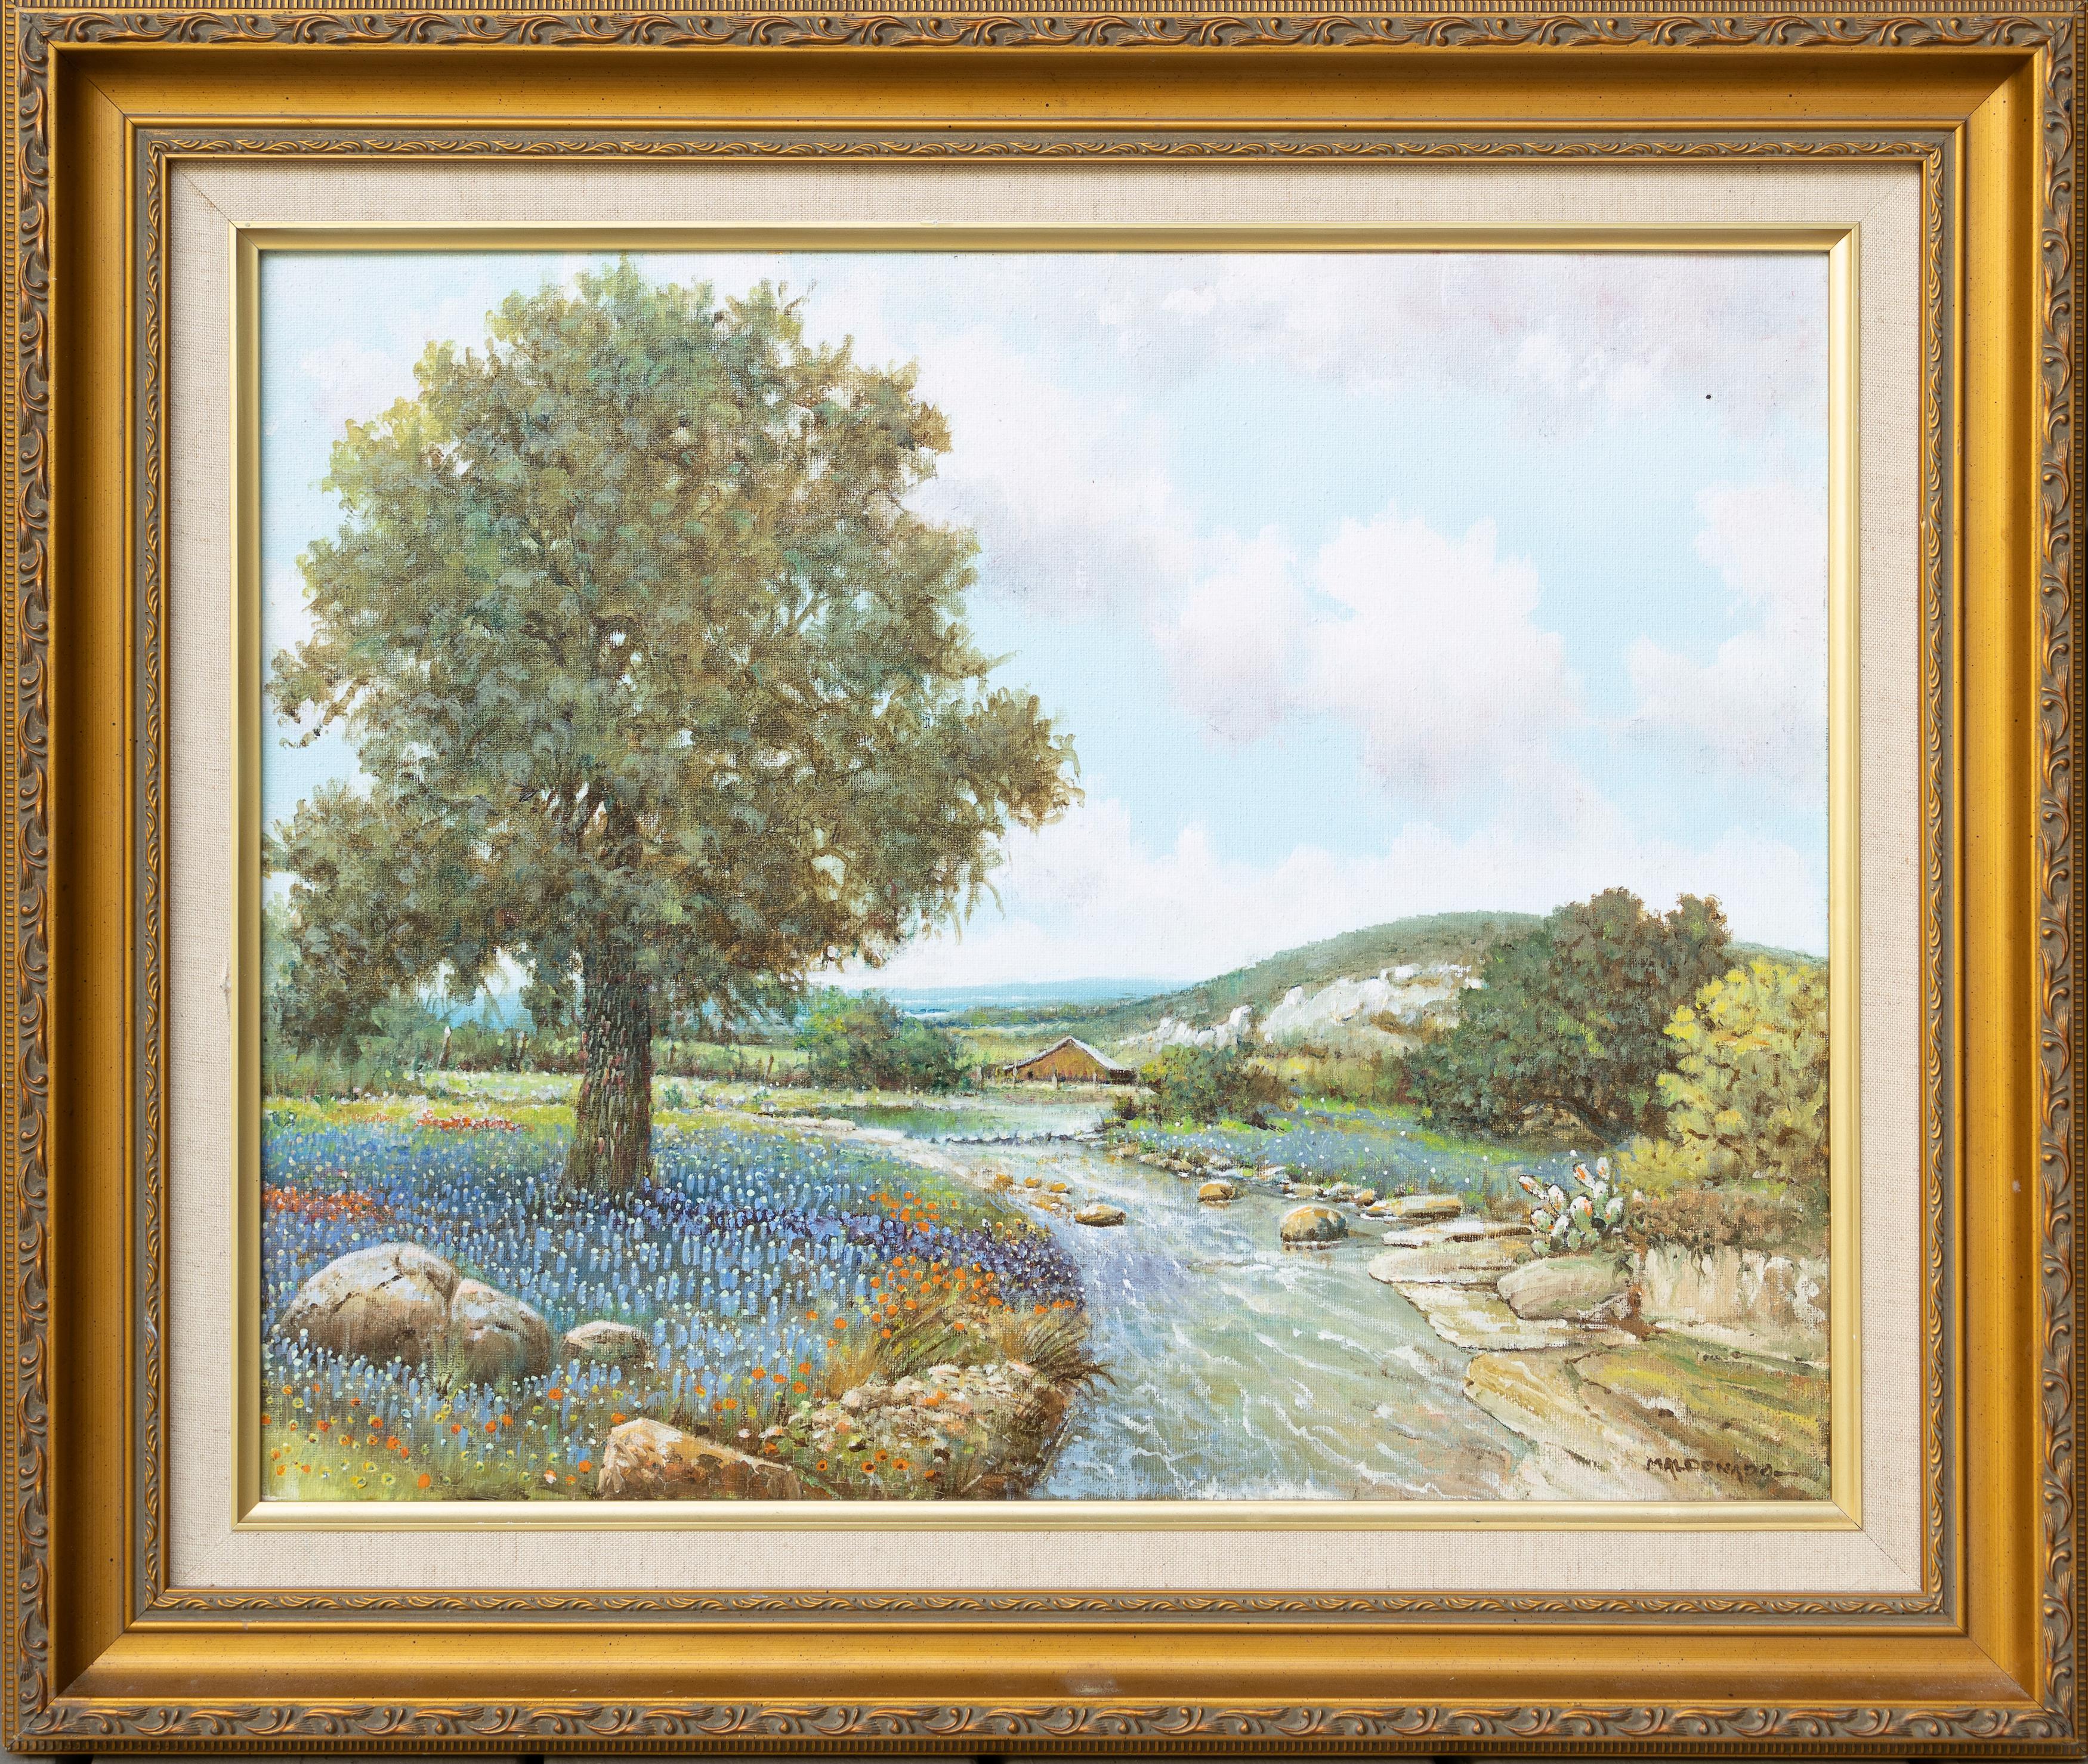 Springtime in the Texas Hill Country with Bluebonnets - Painting by Daniel Maldonado